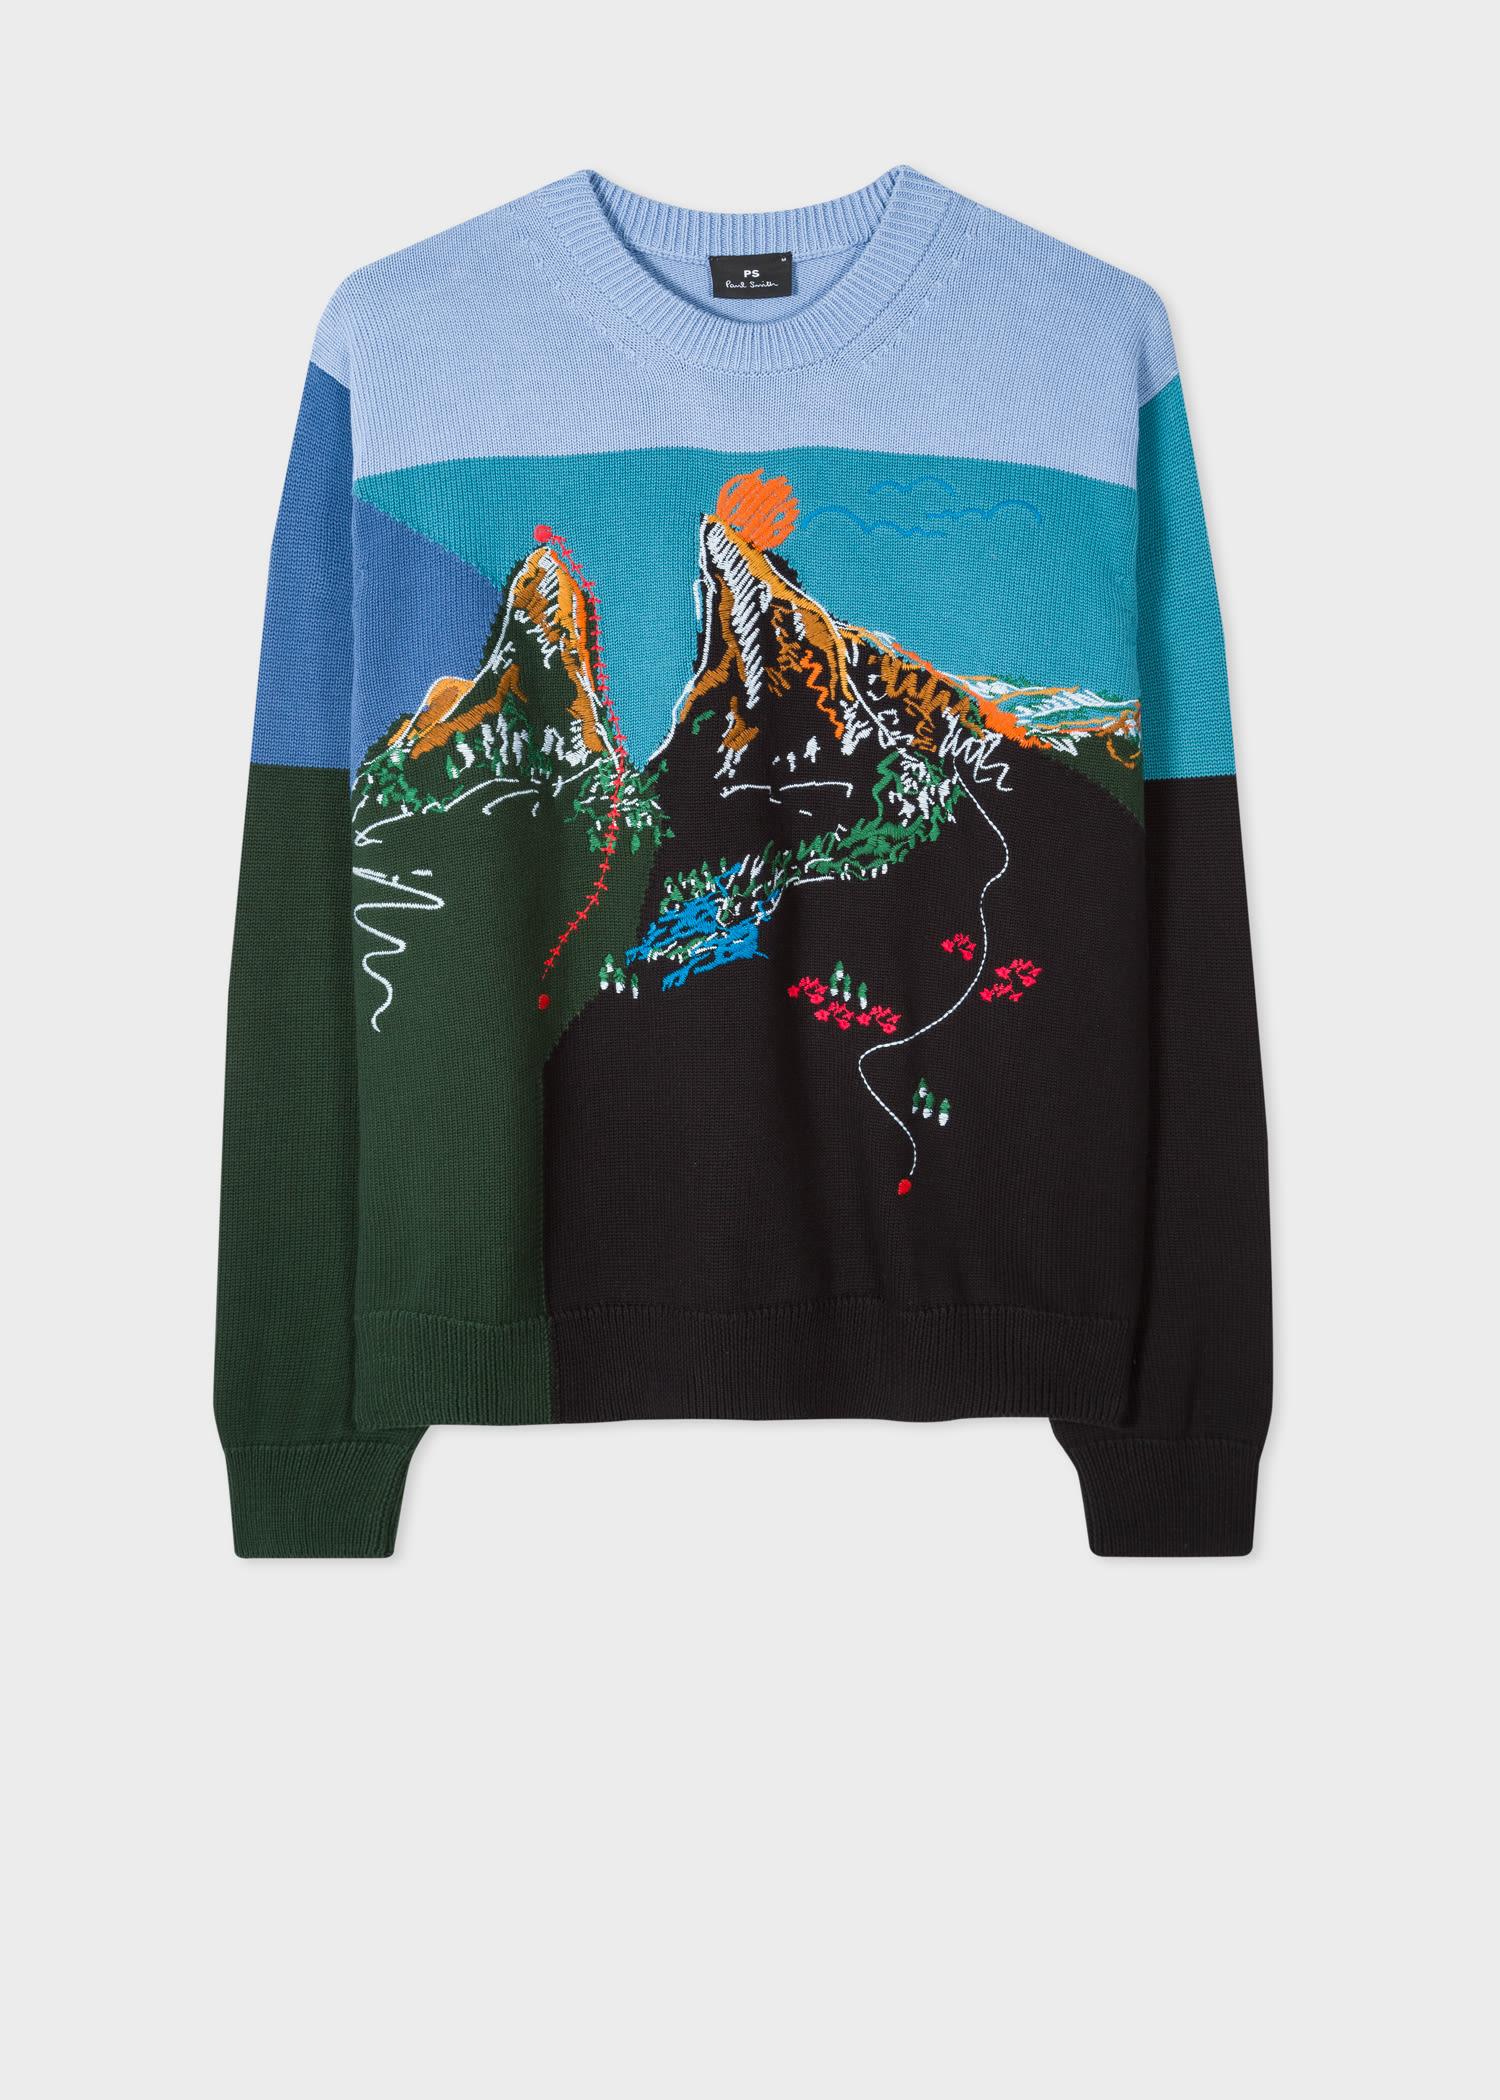 Paul Smith Cotton Embroidered 'mountain' Sweater in Blue for Men - Lyst